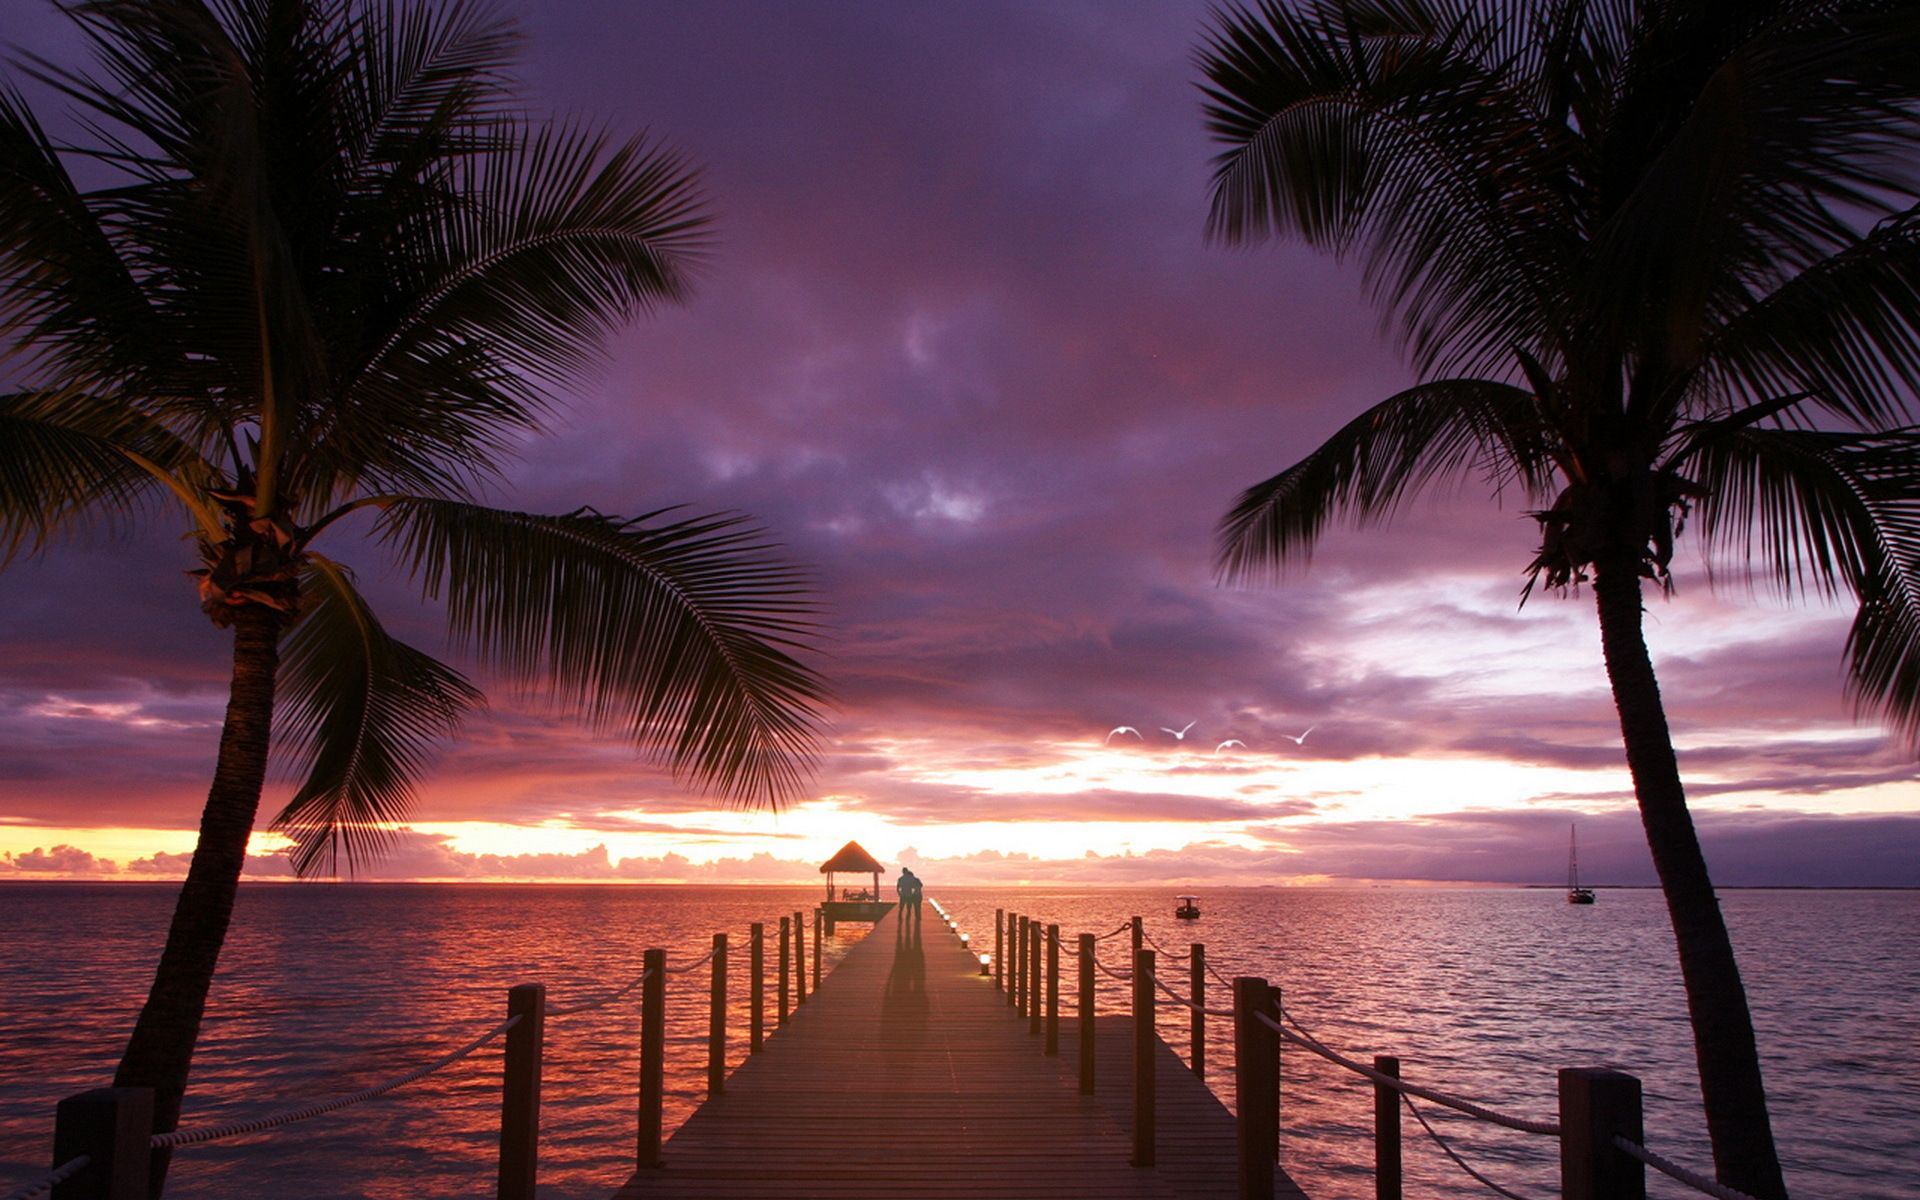 live wallpaper free download: Beautiful Summer 2012 romantic place is a great wallpaper for your